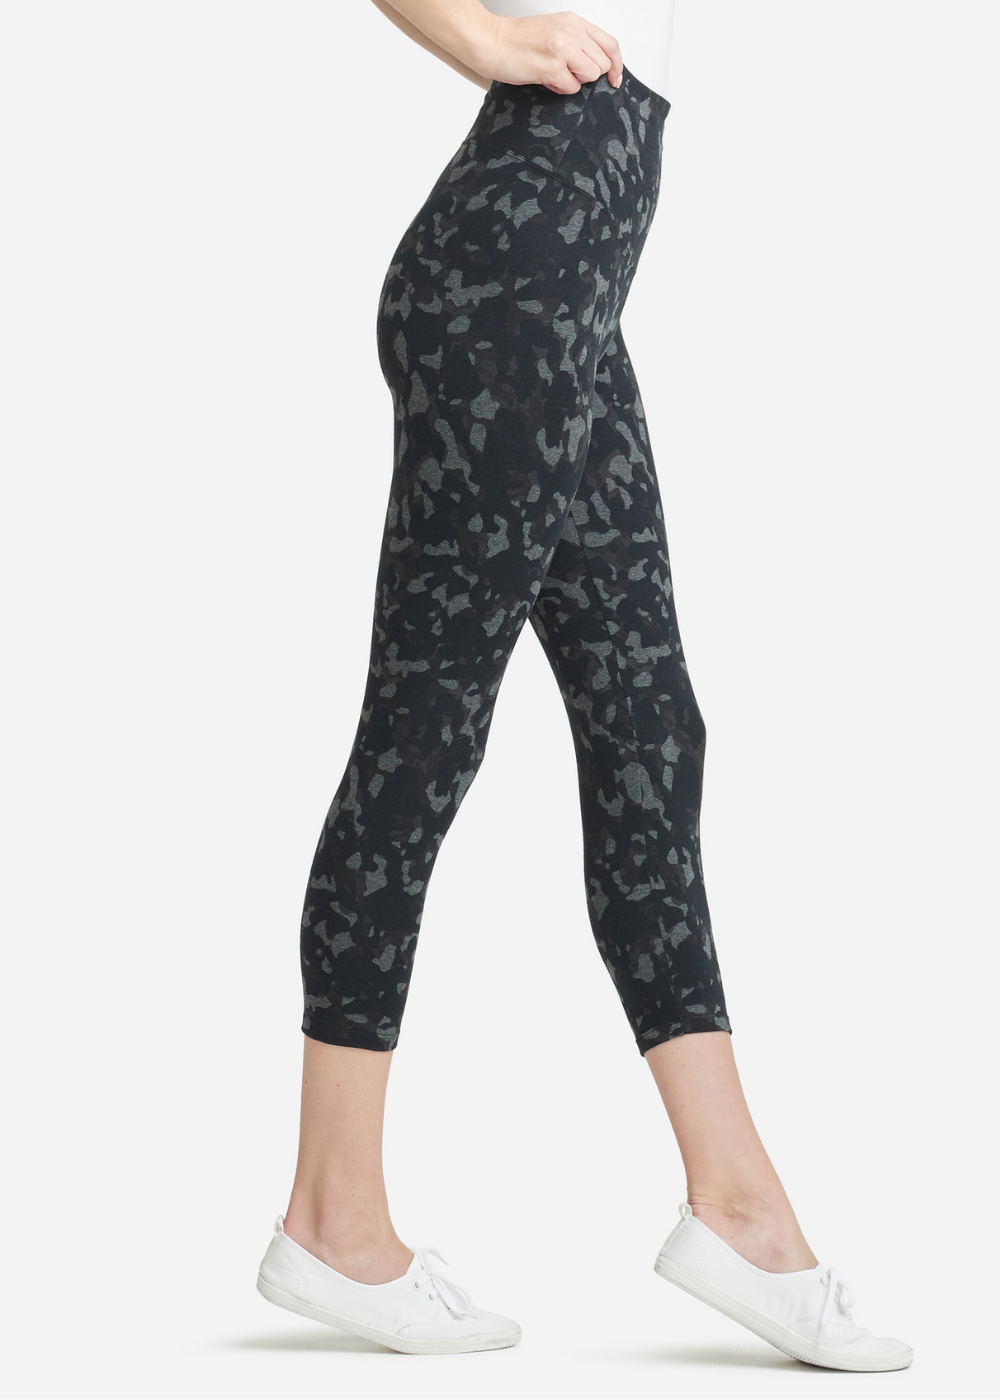 Gloria 7/8 Ankle Shaping Legging Heather Charcoal Camo - Cotton Stretch from Yummie in Heather Charcoal Camo  - 1